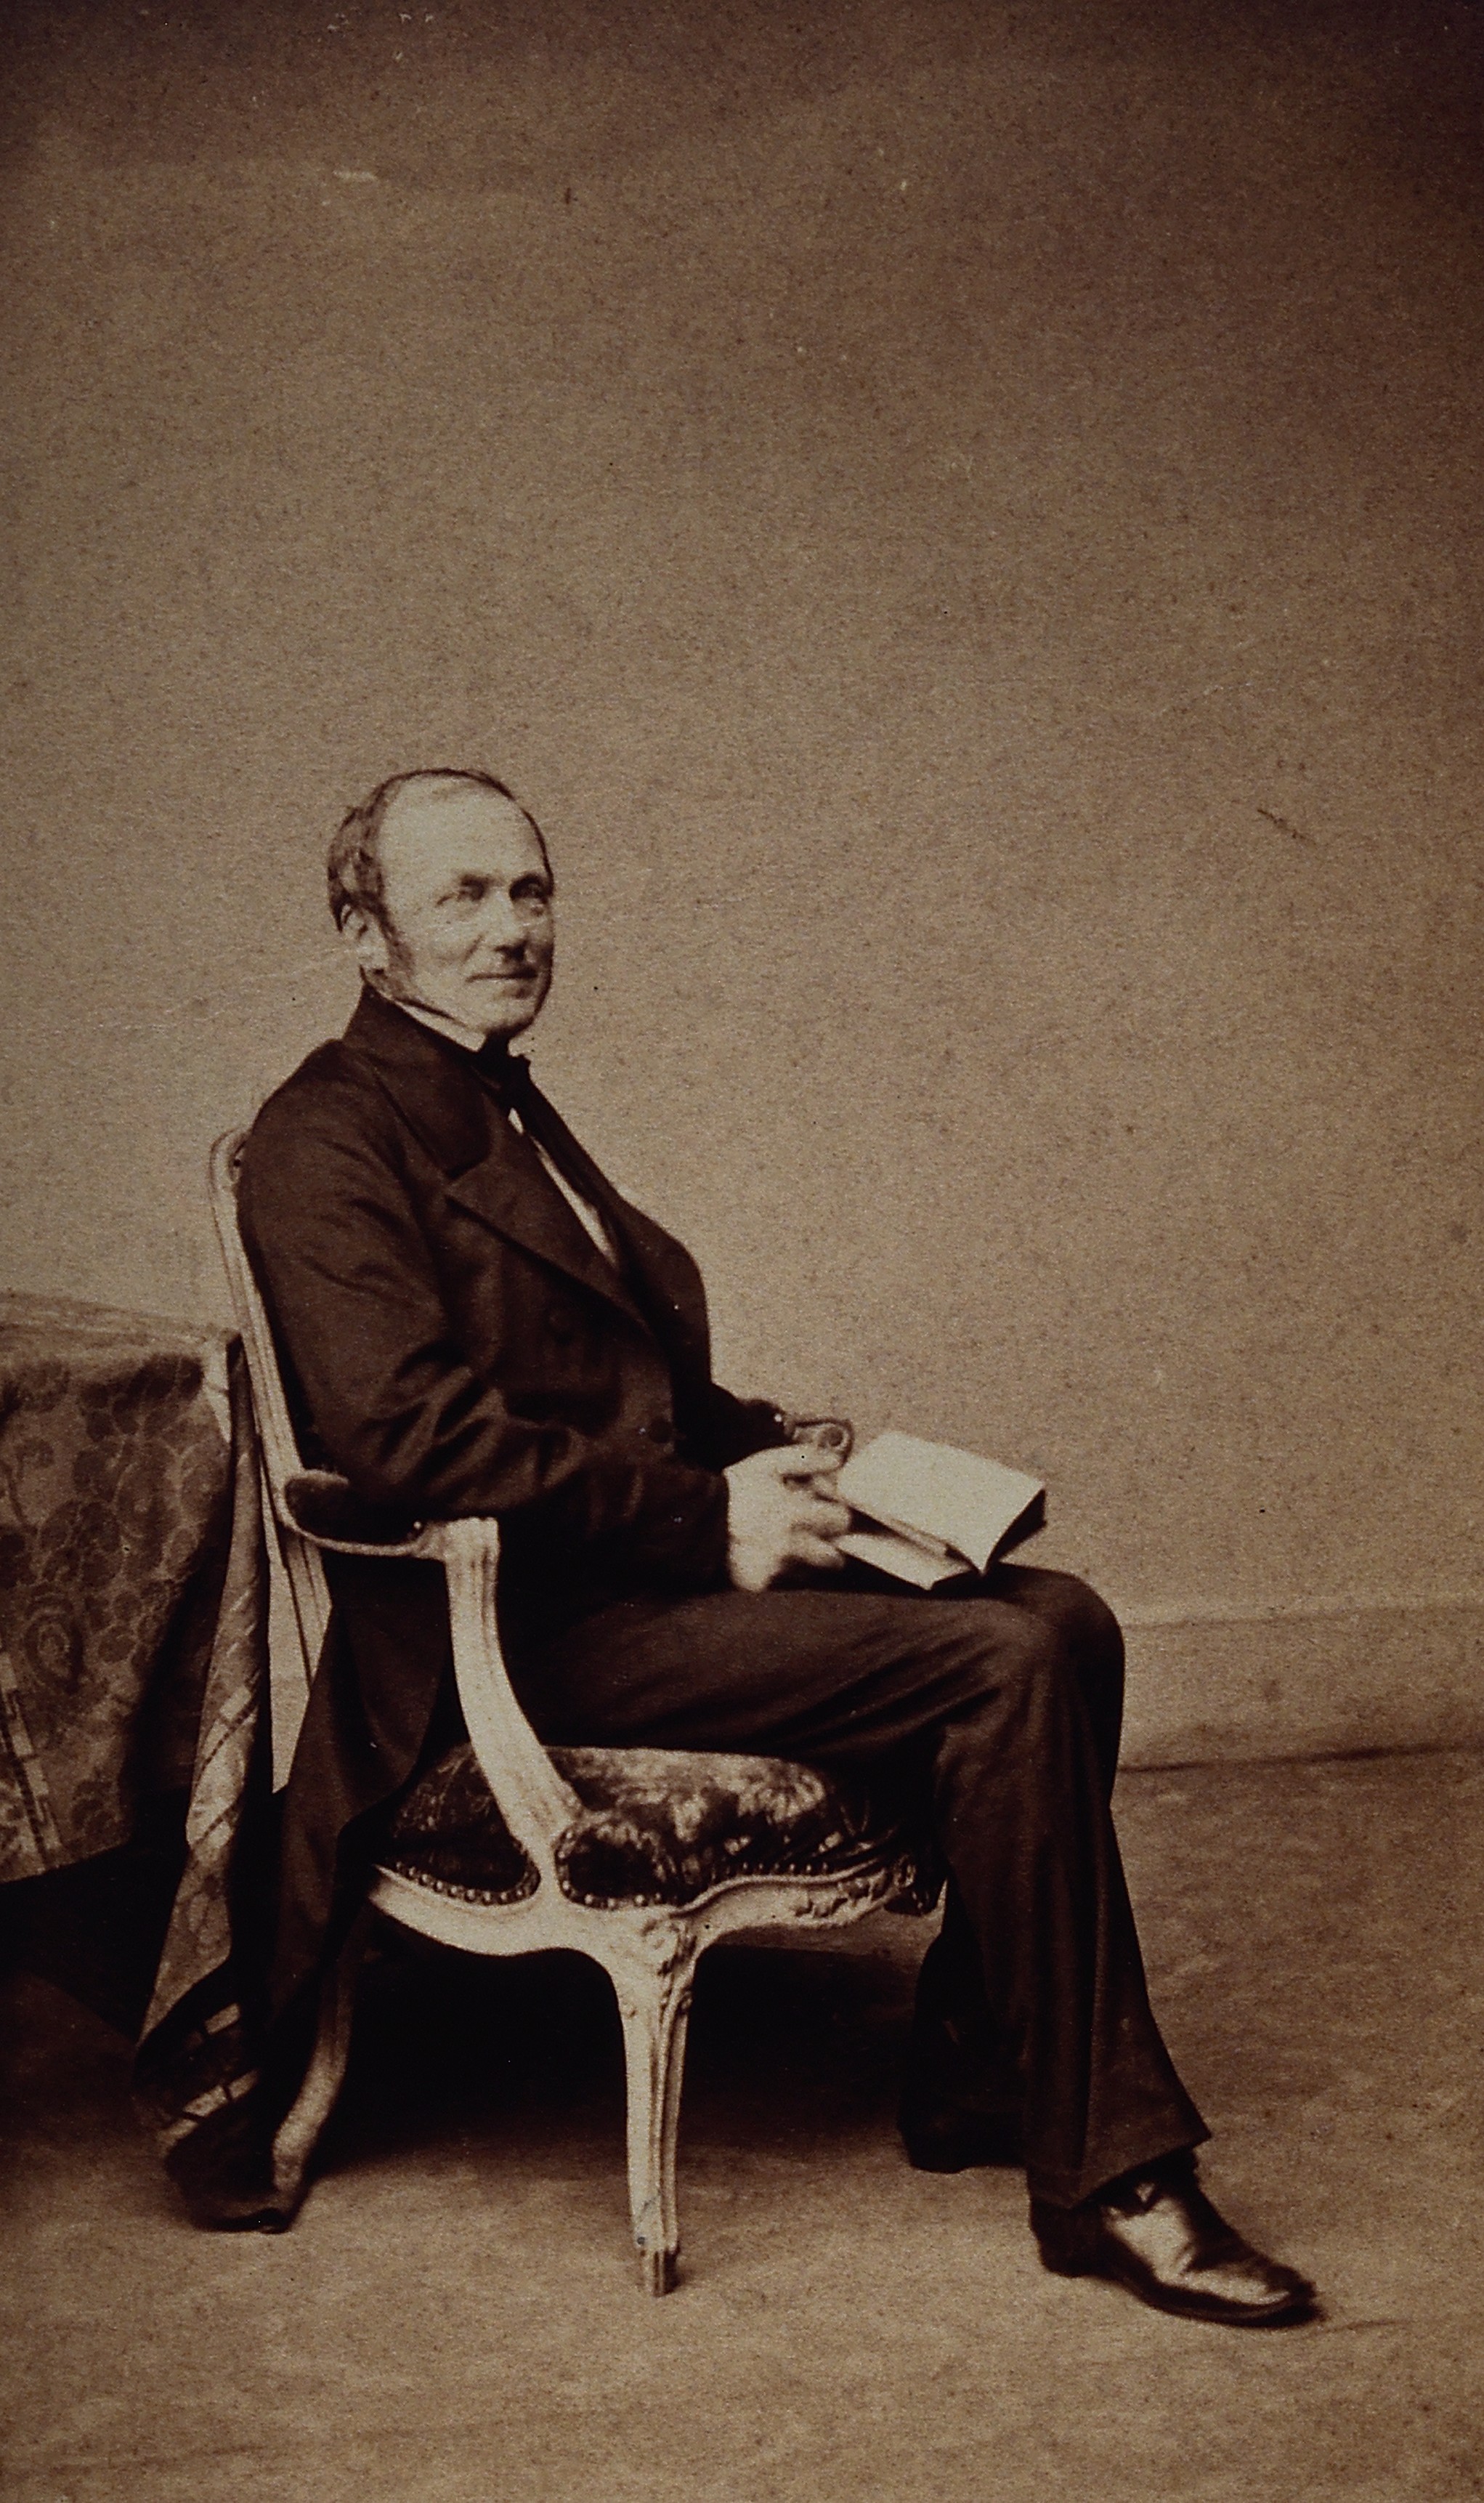 Isidore Geoffroy Saint-Hilaire. Photograph by Franck. Wellcome V0028143